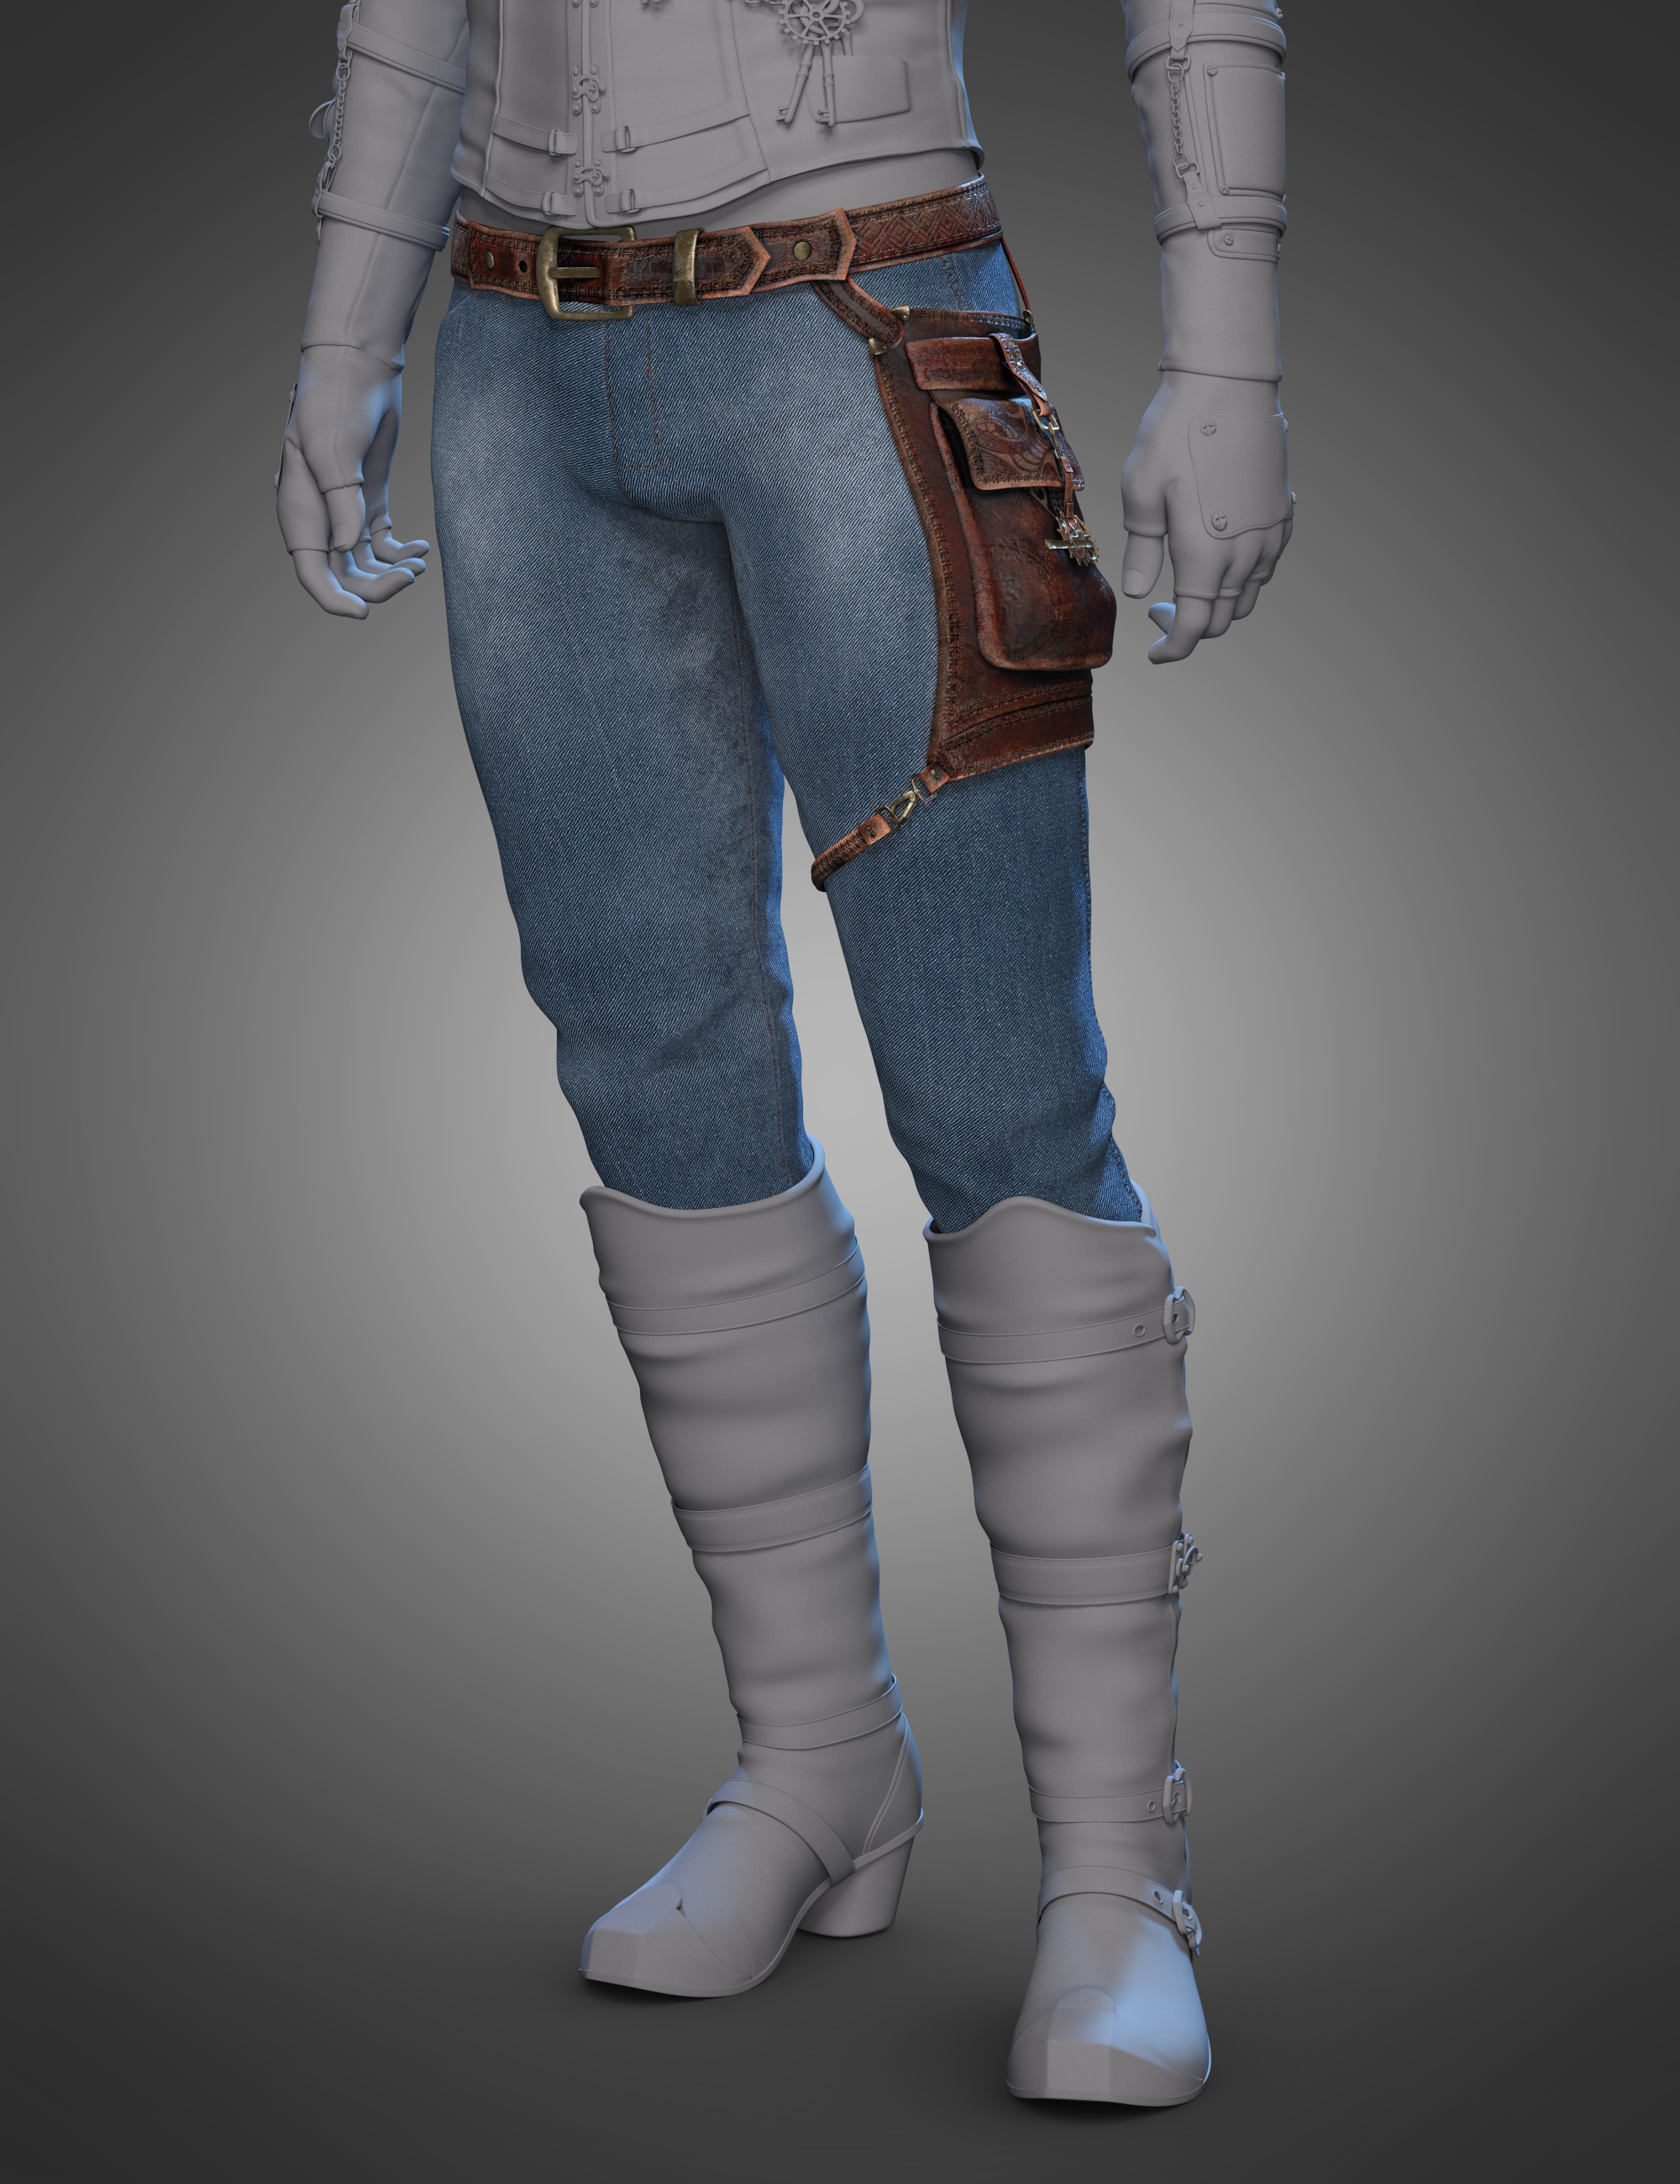 Halcyon Fragment Pants for Genesis 8 and 8.1 Males